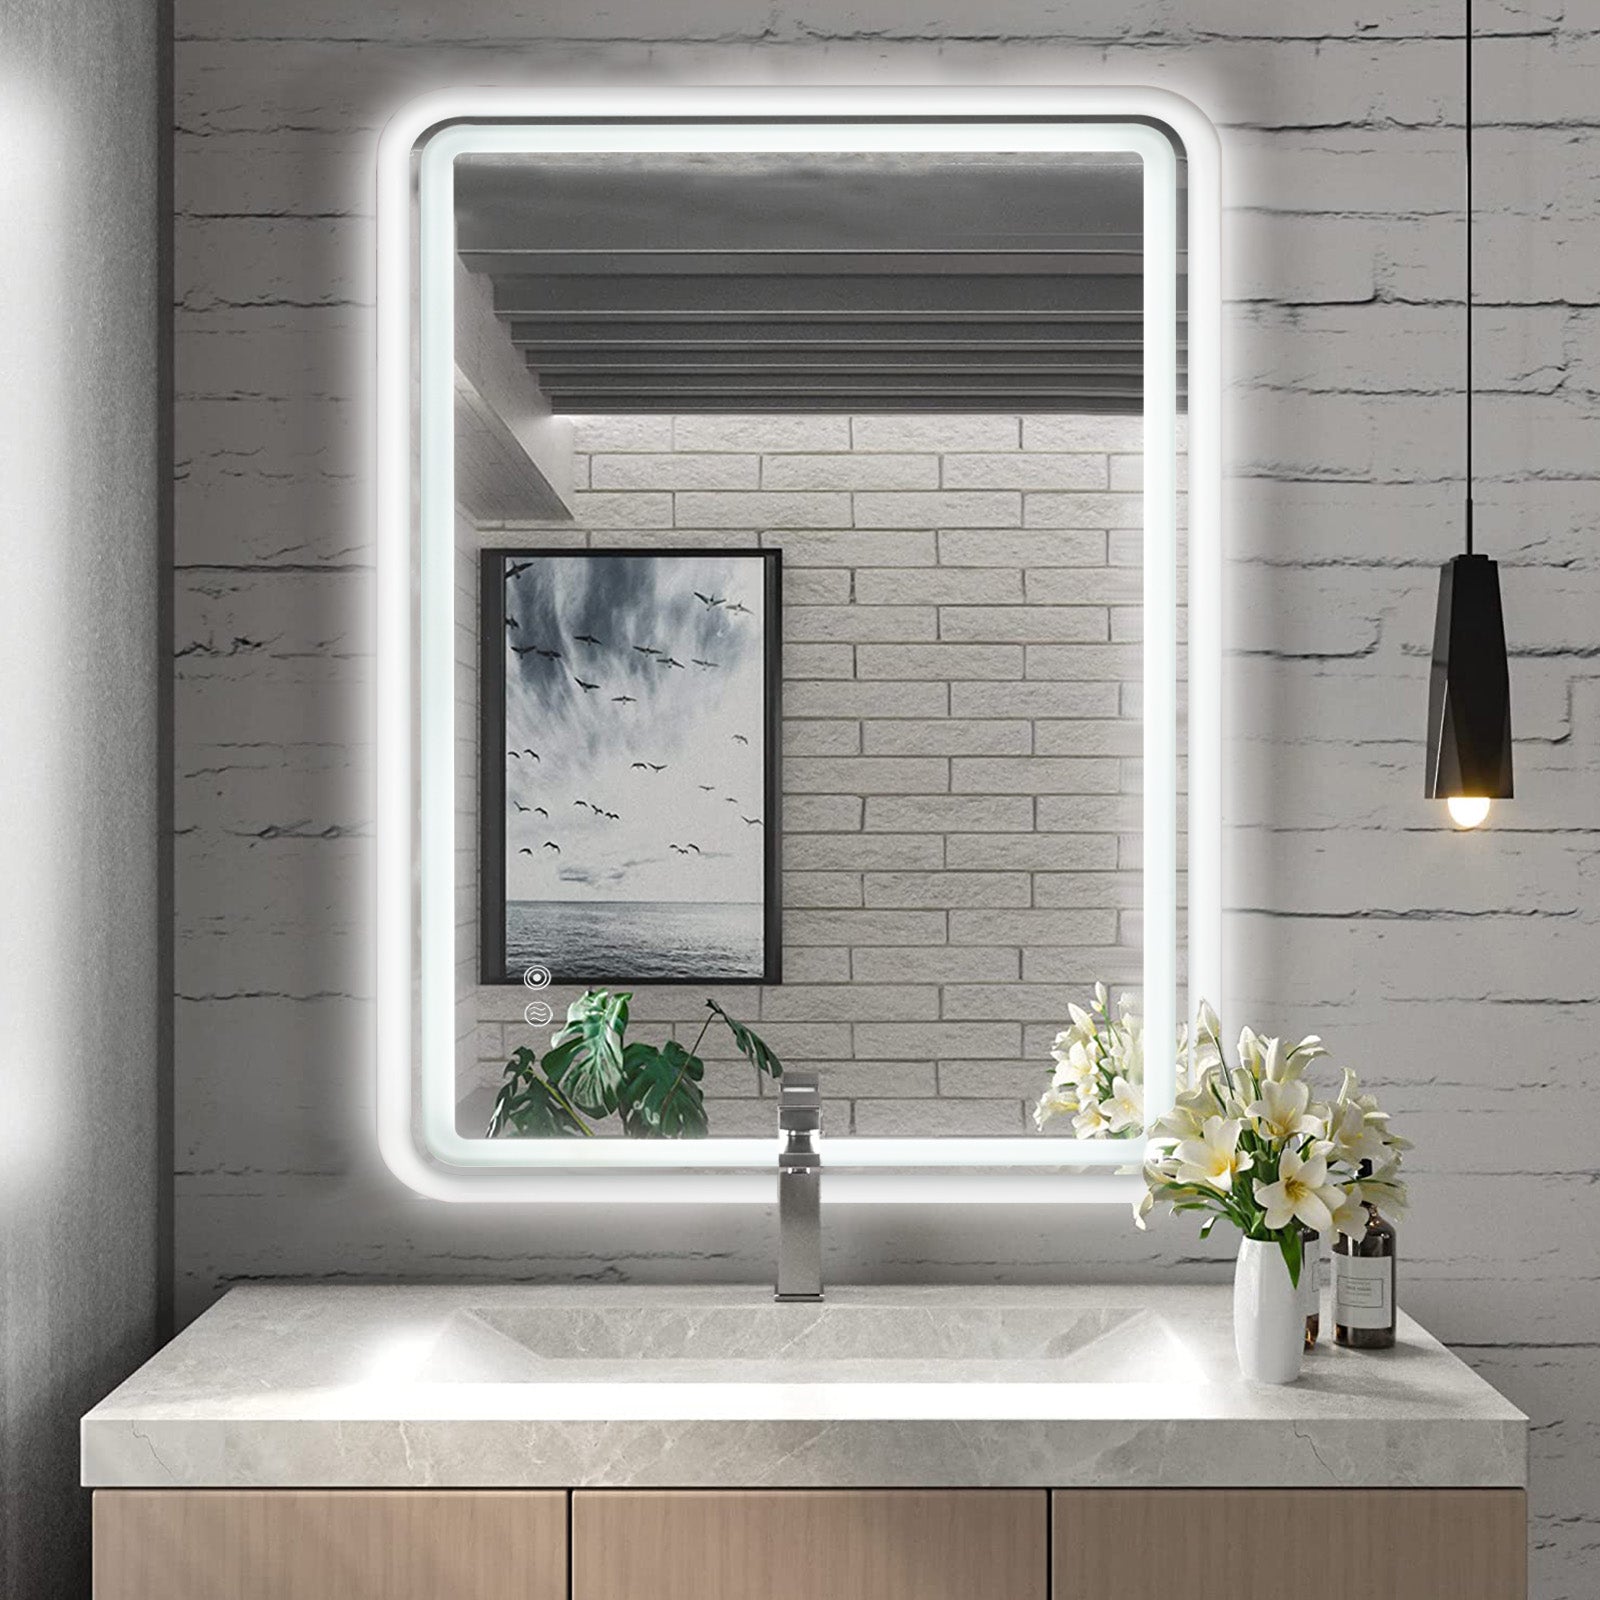 White Framed LED Bathroom Mirror with Lights, Anti-Fog, Dimmable, Backlit + Front Lit, Lighted Bathroom Vanity Mirror for Wall, Memory Function